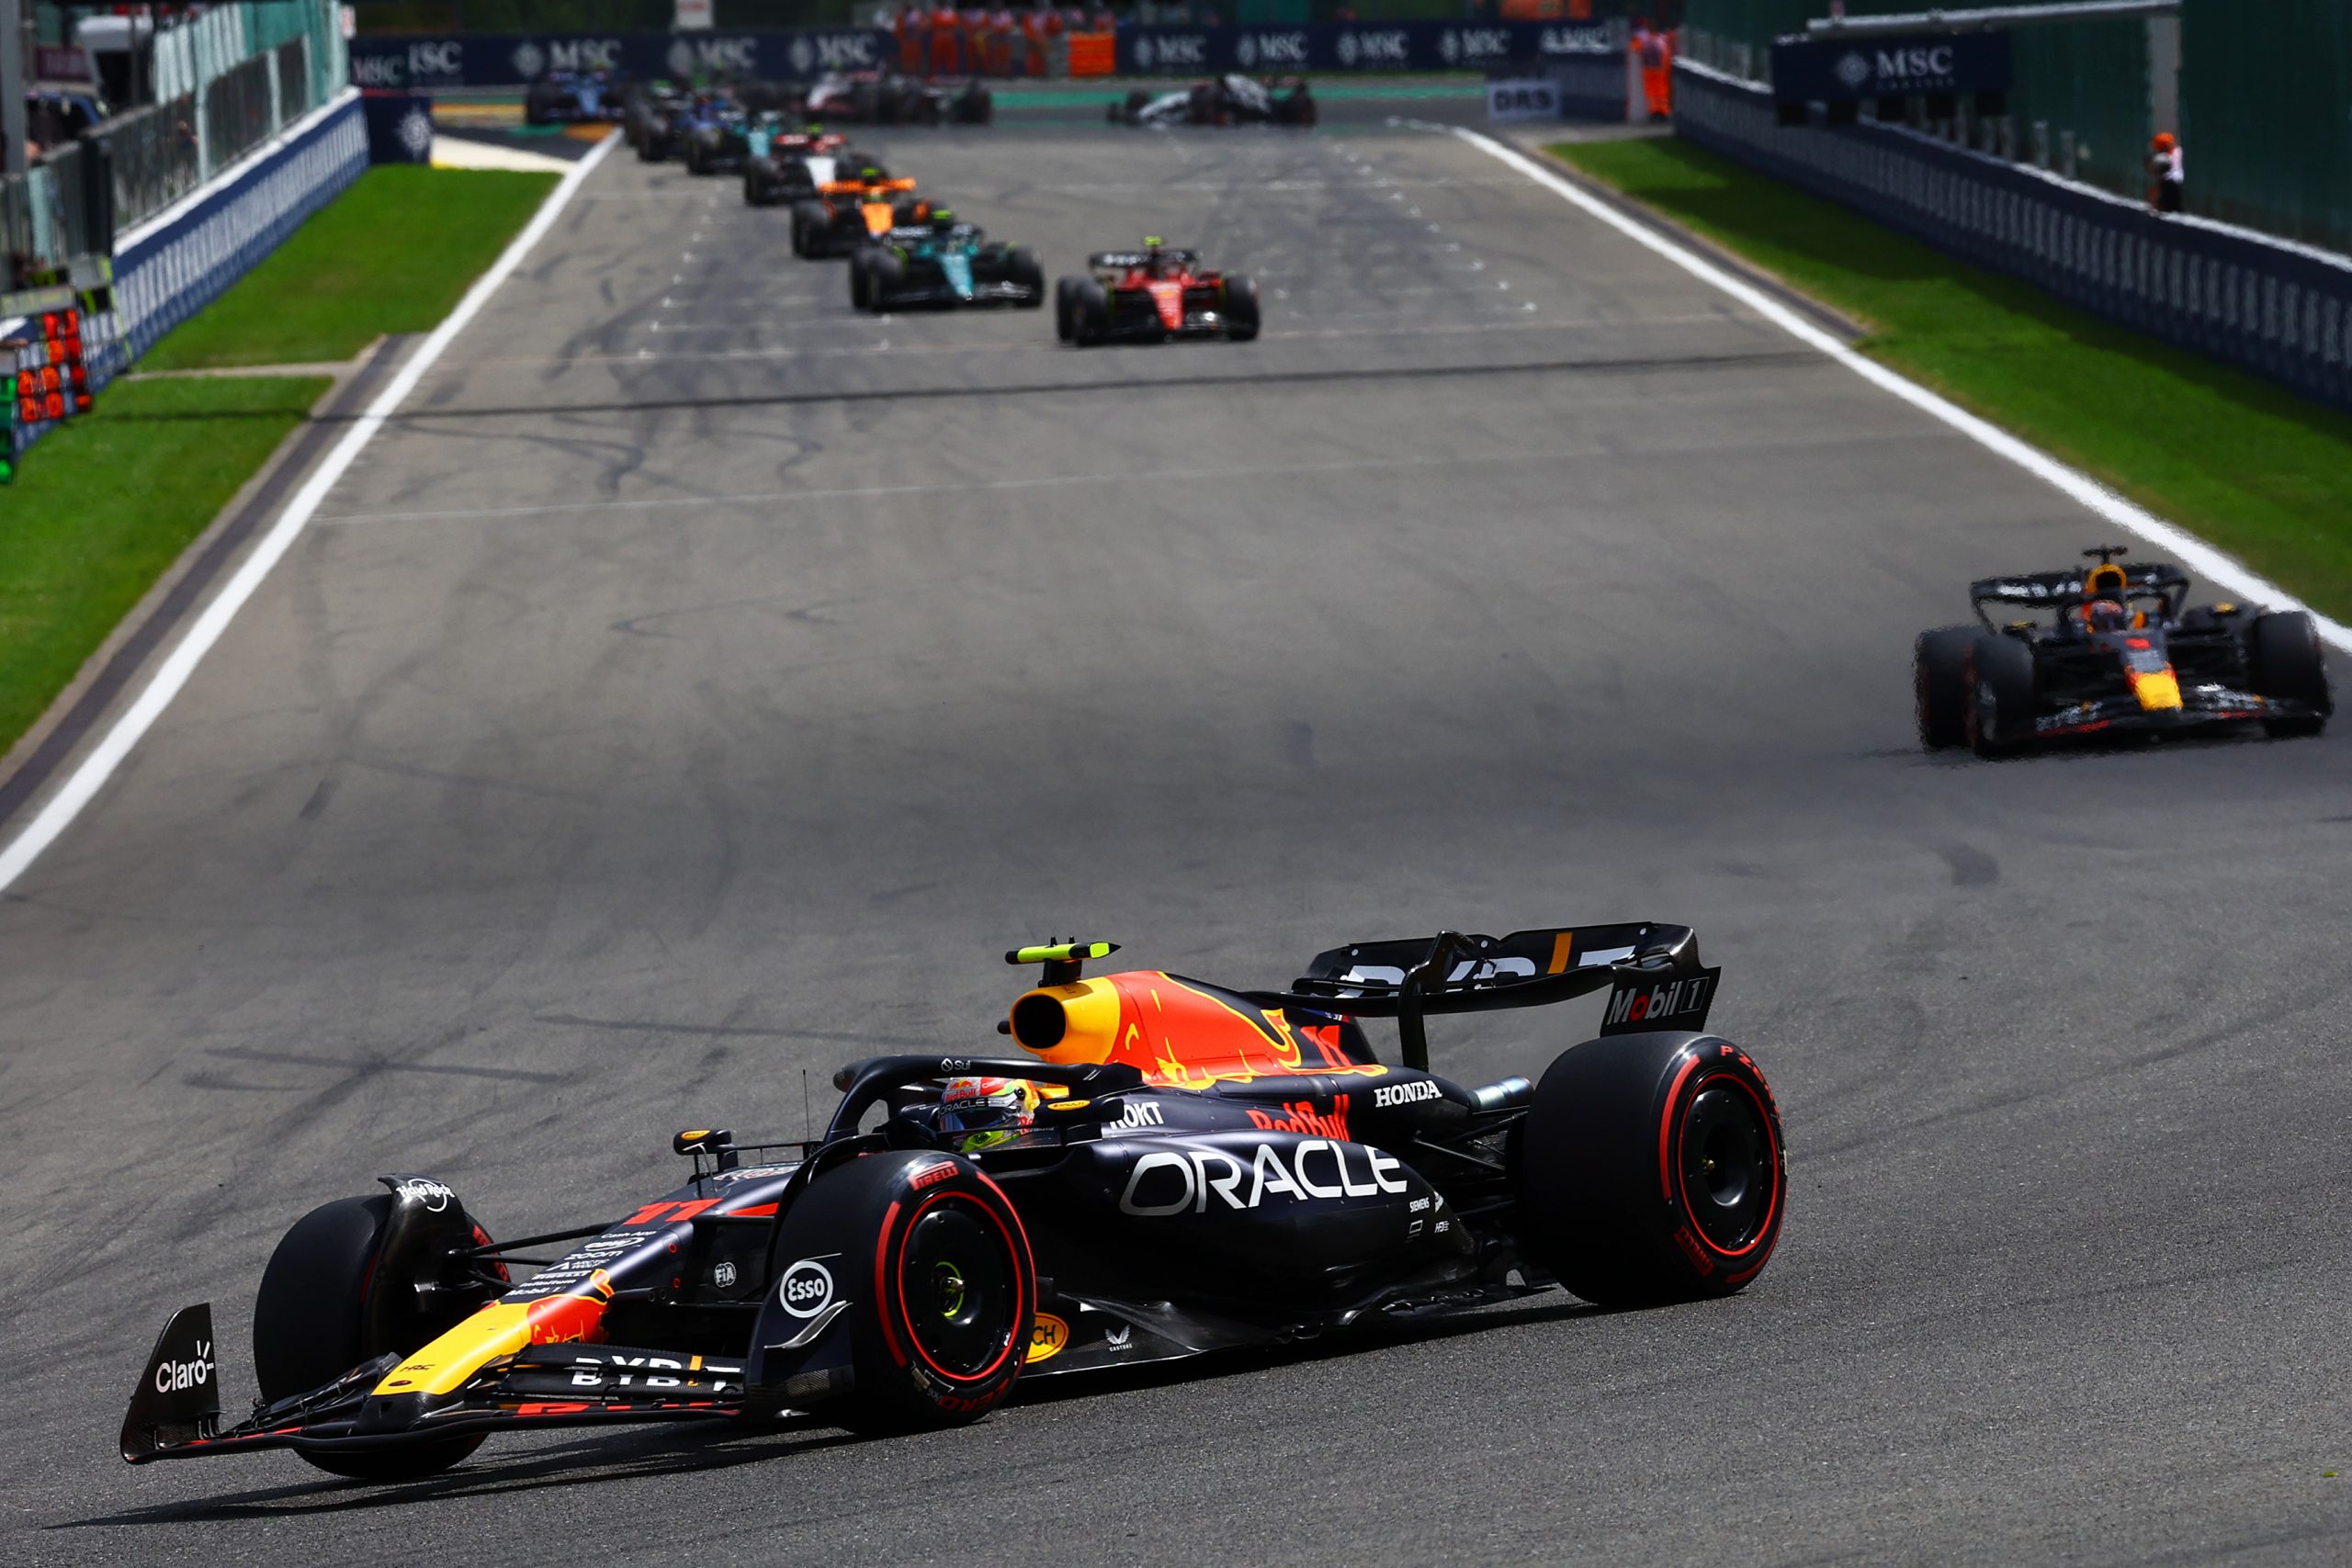 Sergio Perez (11) leads the way in his Red Bull in the early laps of the Belgian Grand Prix